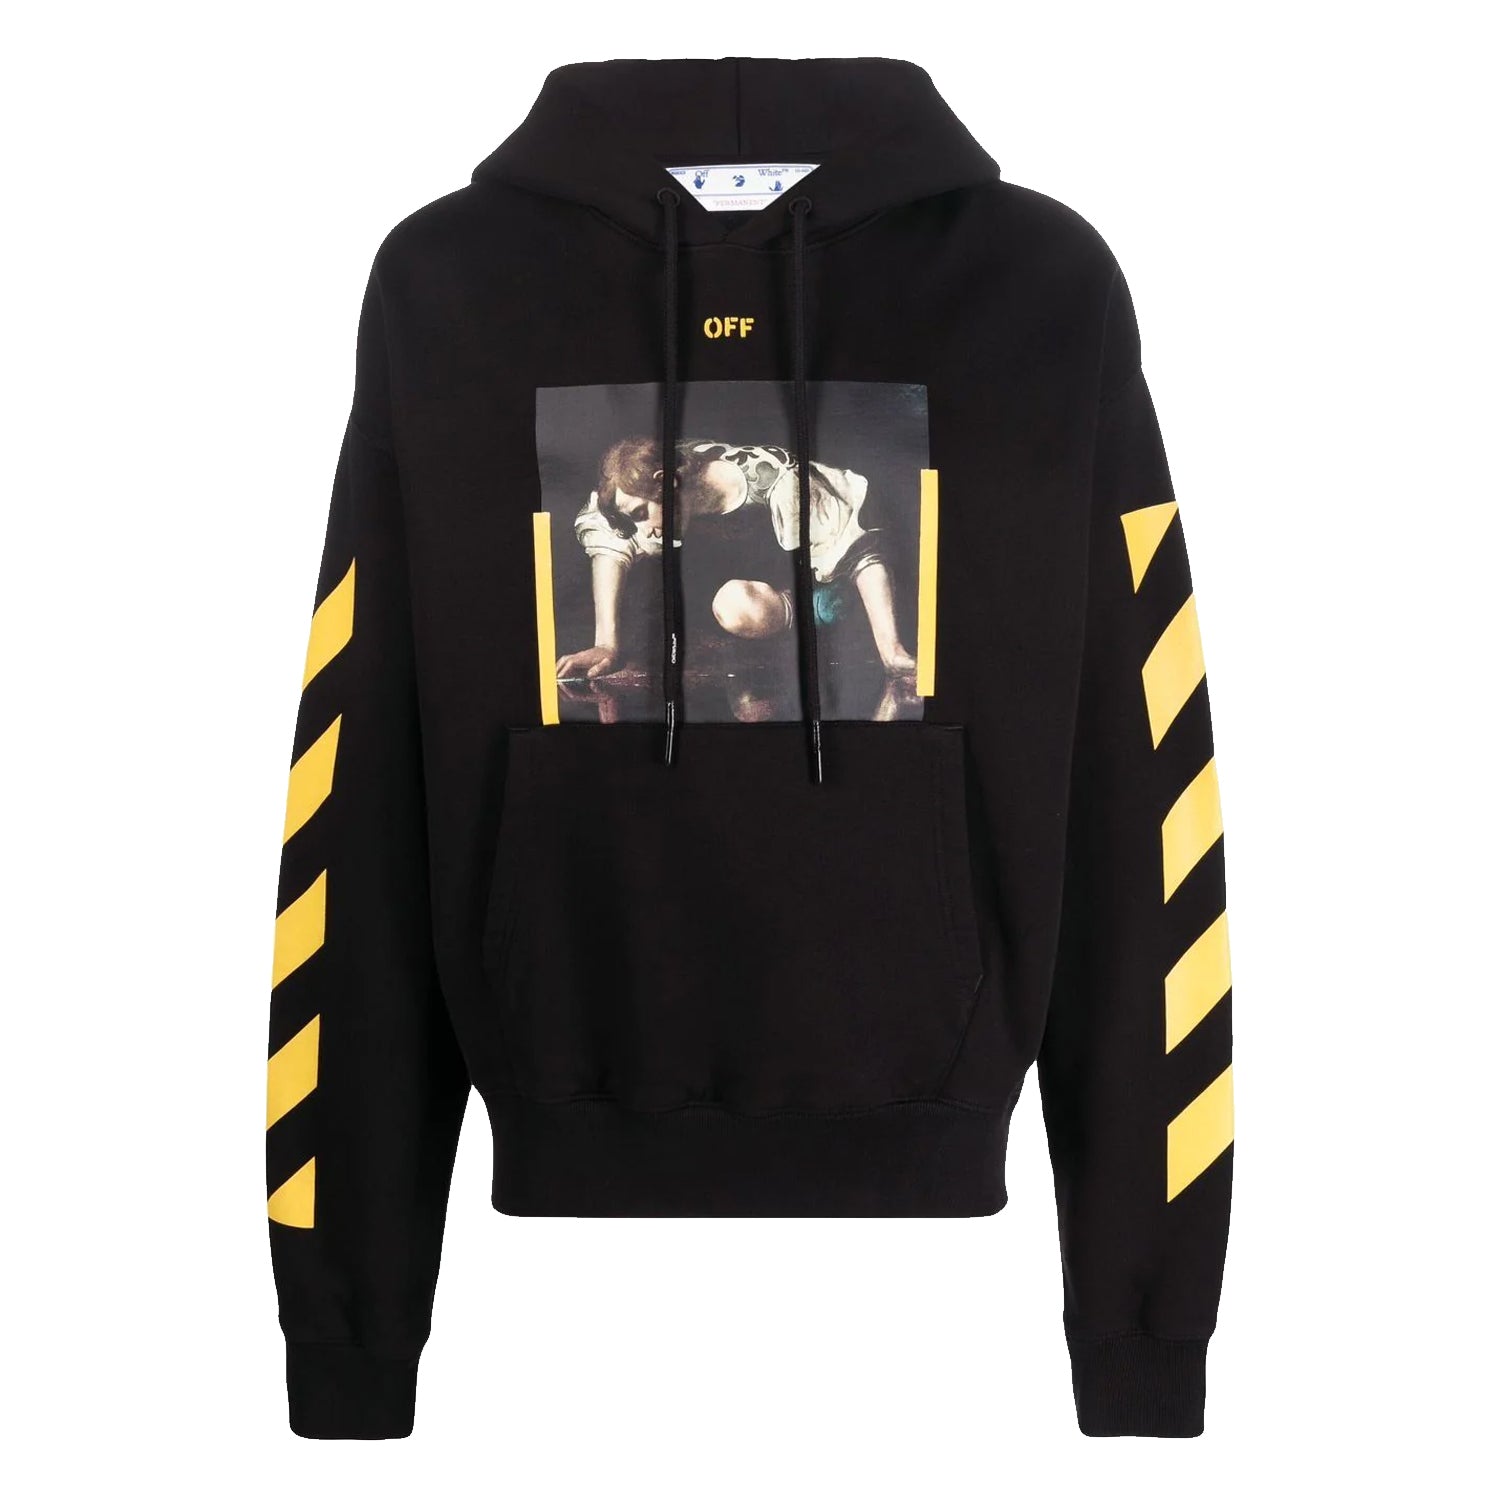 Off-white Diag Arr Carav Narcis Over Hoodie Mens Style : Ombb037c99fle01